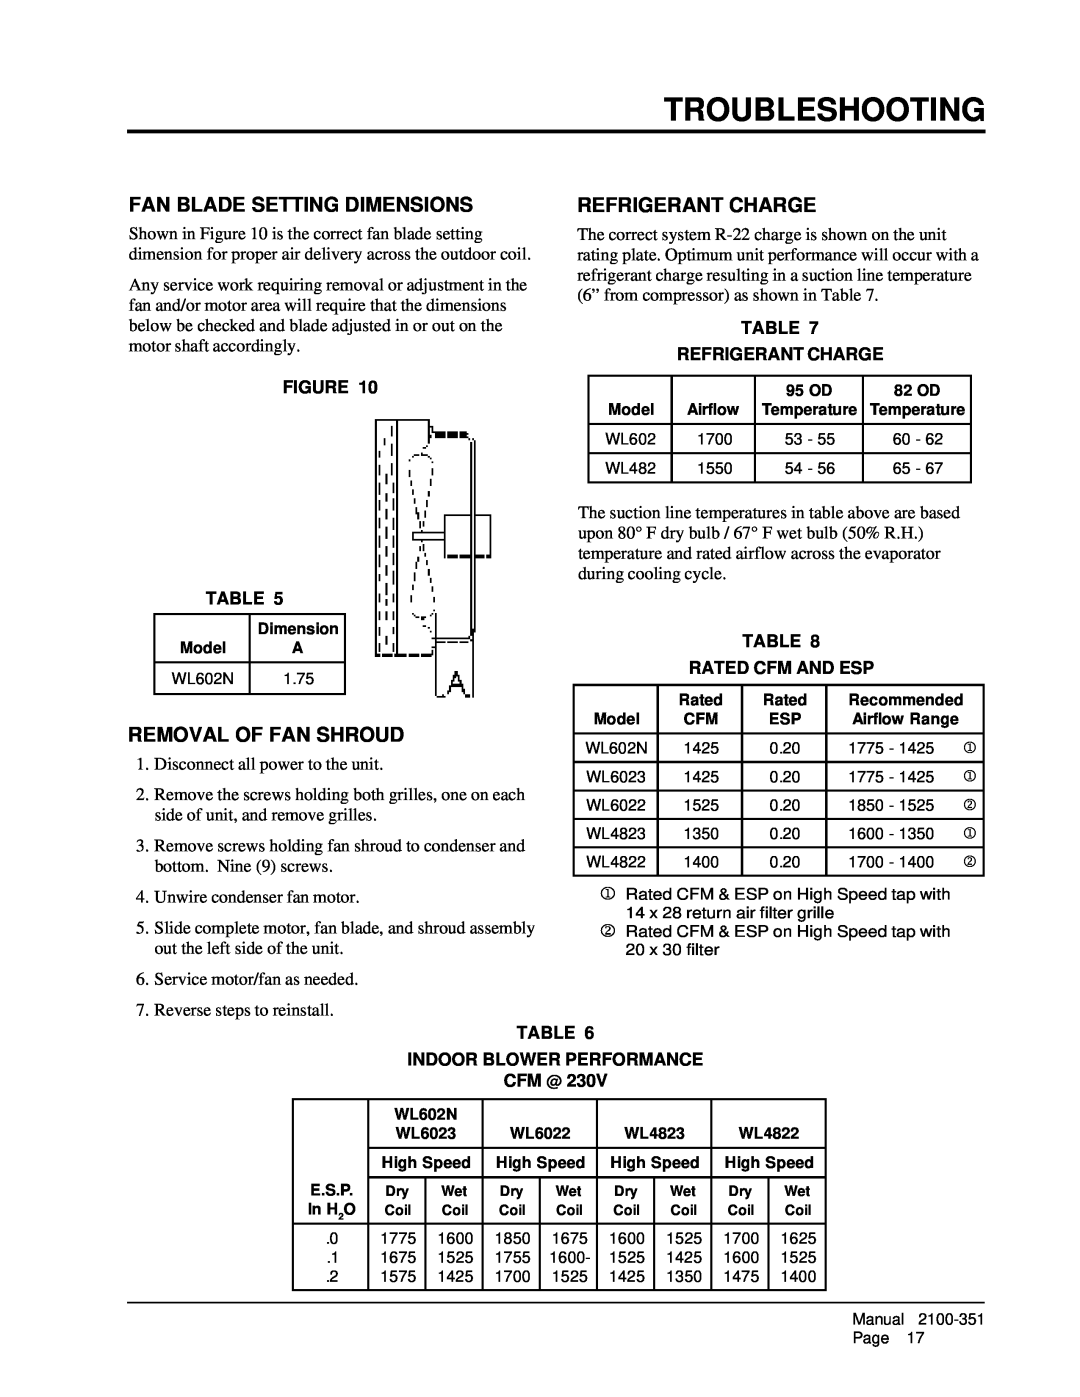 Bard WL6022 Troubleshooting, Fan Blade Setting Dimensions, Refrigerant Charge, Removal Of Fan Shroud, Rated Cfm And Esp 